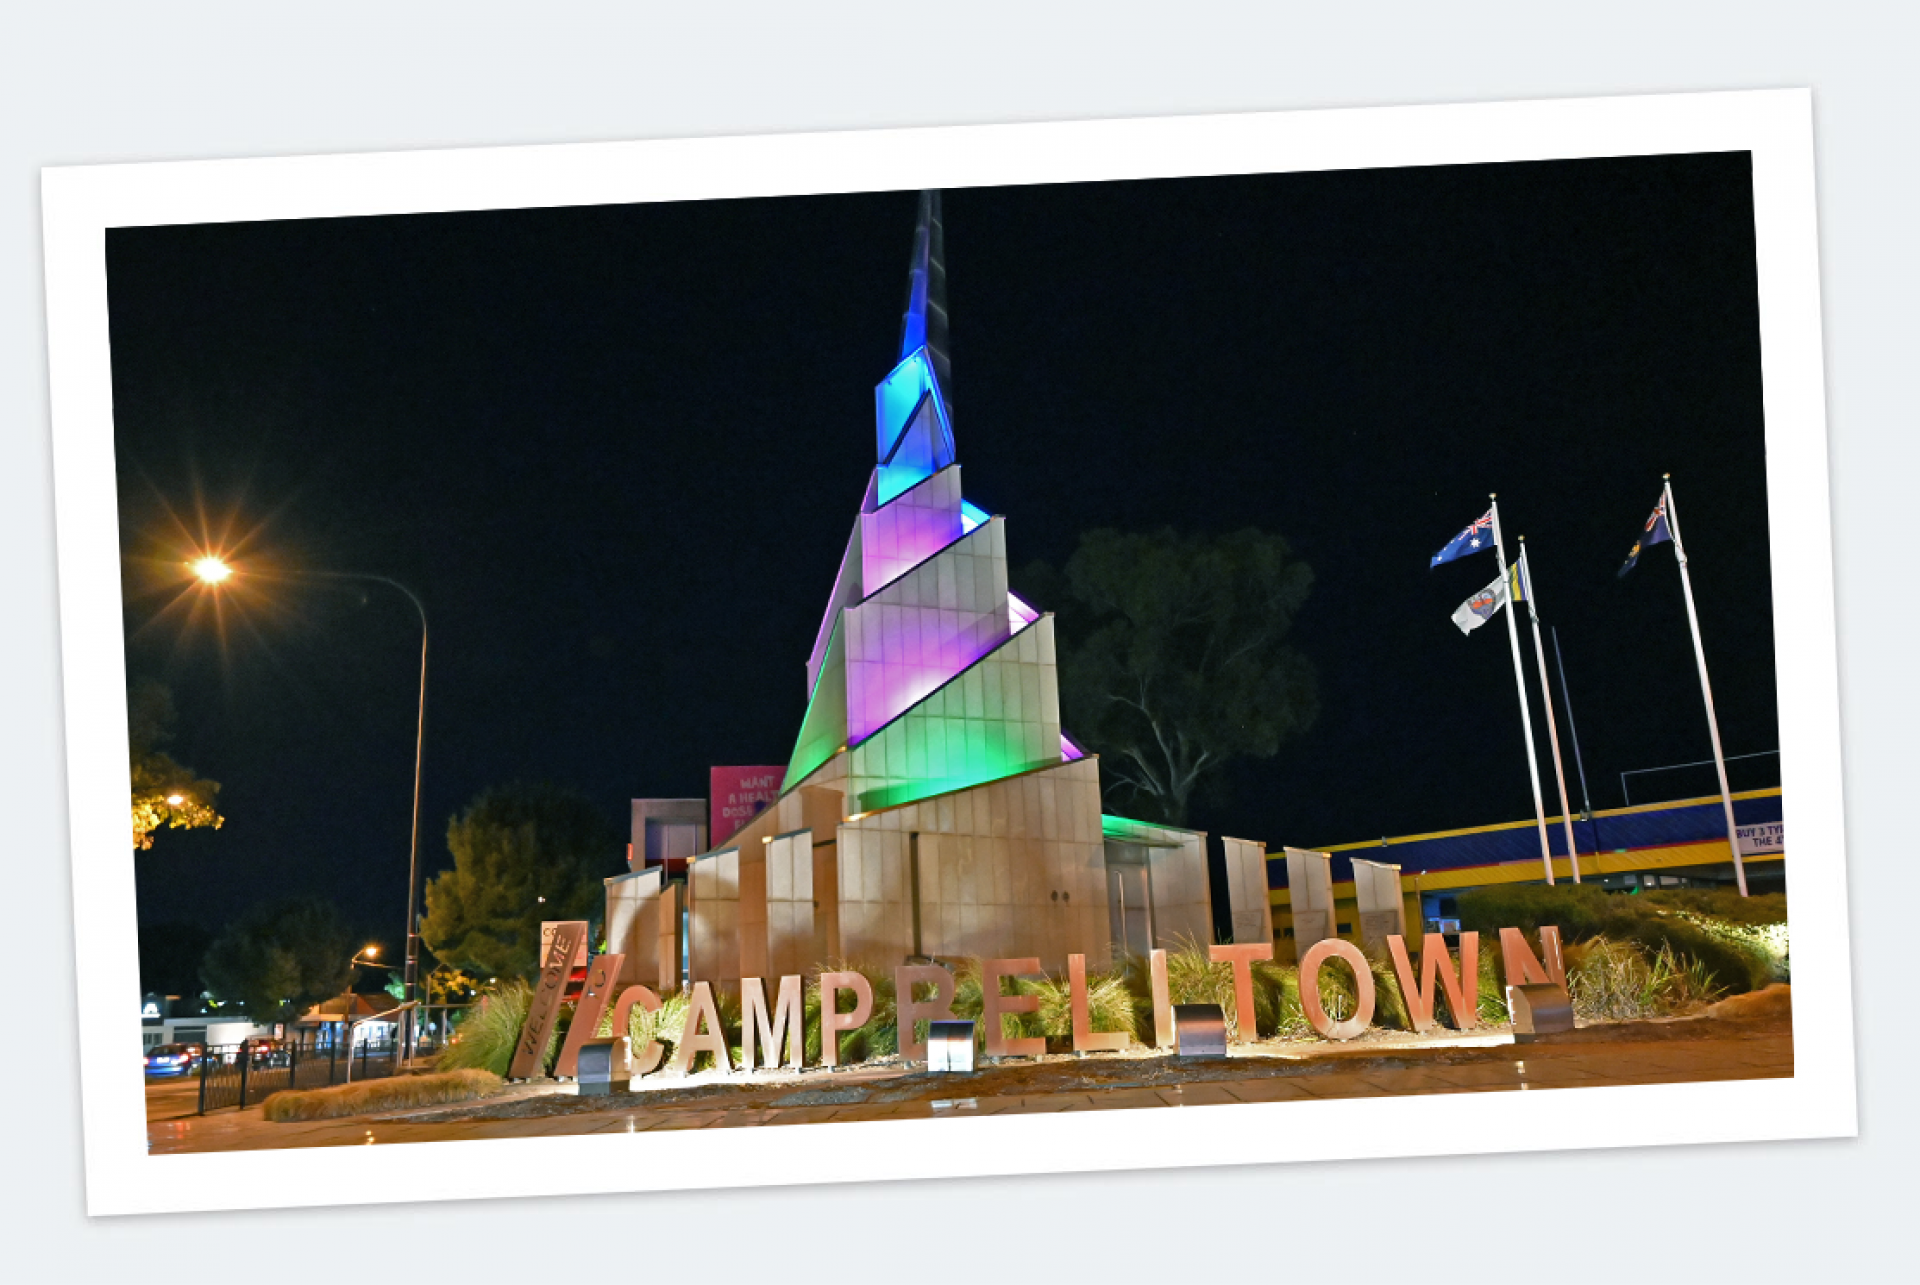 Migrant Monument in Campbelltown lit up at night.